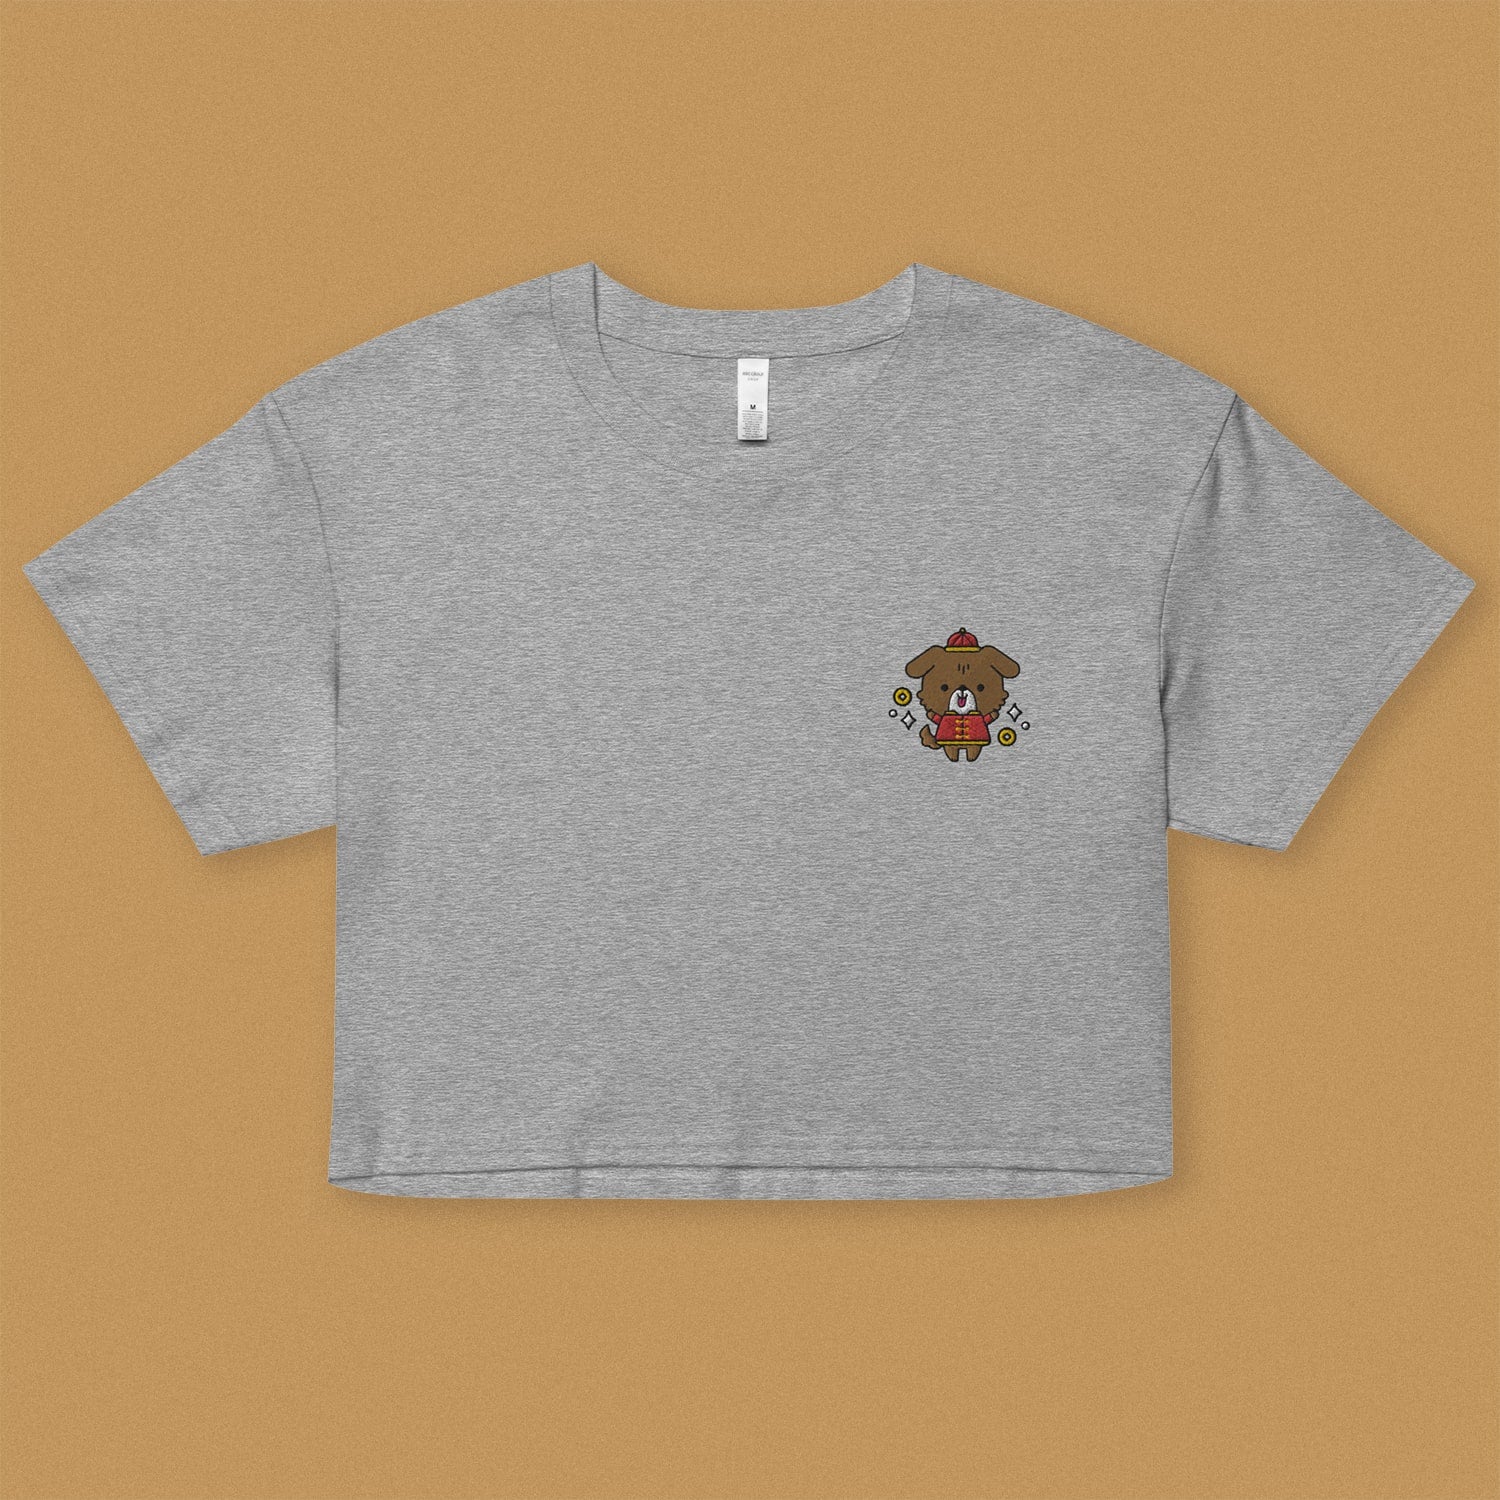 Year of the Dog Embroidered Crop T-Shirt - Ni De Mama Chinese Clothing